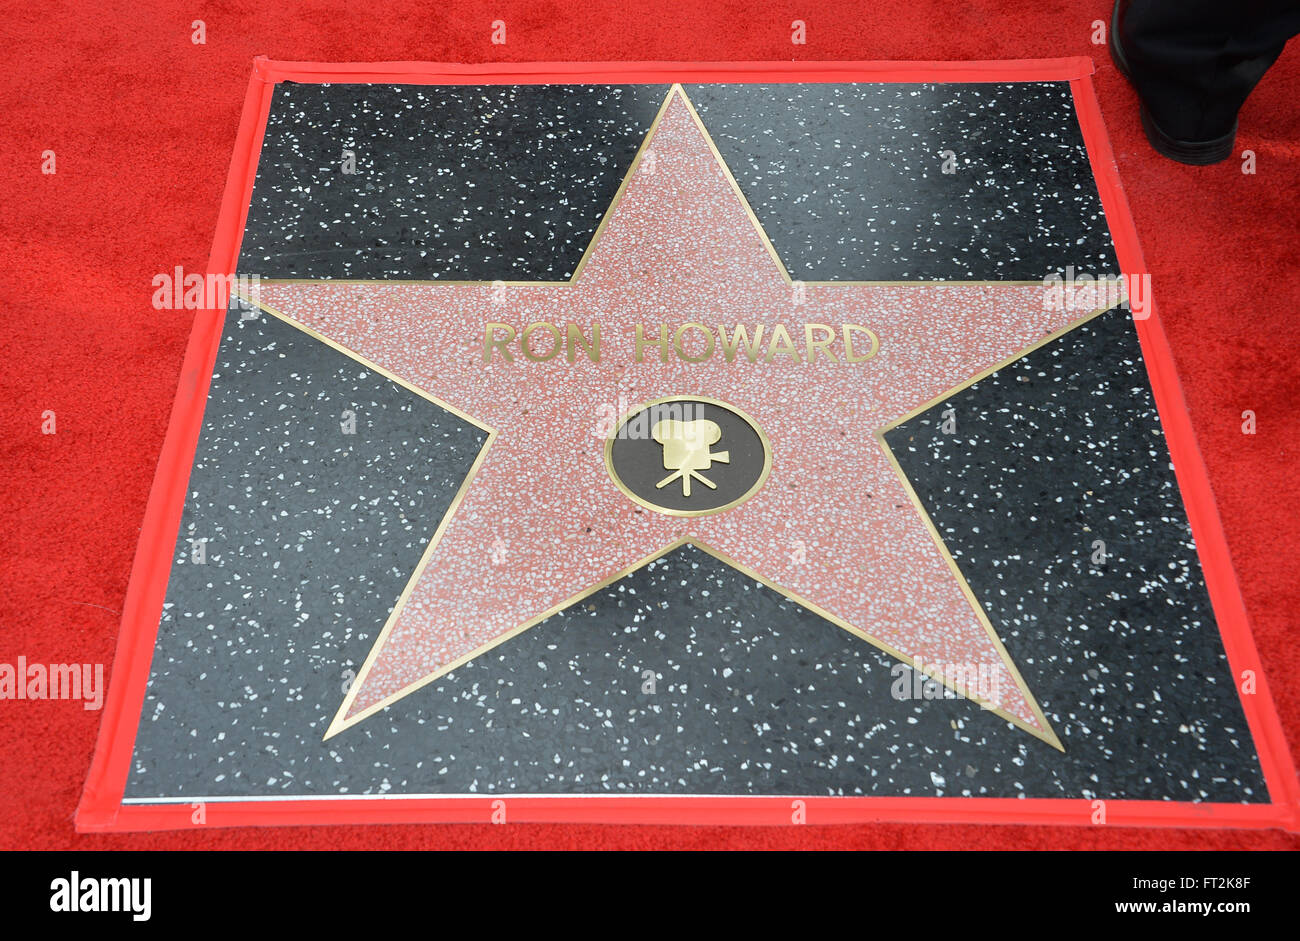 LOS ANGELES, CA - DECEMBER 10, 2015: Ron Howard's Star on Hollywood Boulevard where he was honored with the 2,568th star on the Hollywood Walk of Fame. Stock Photo